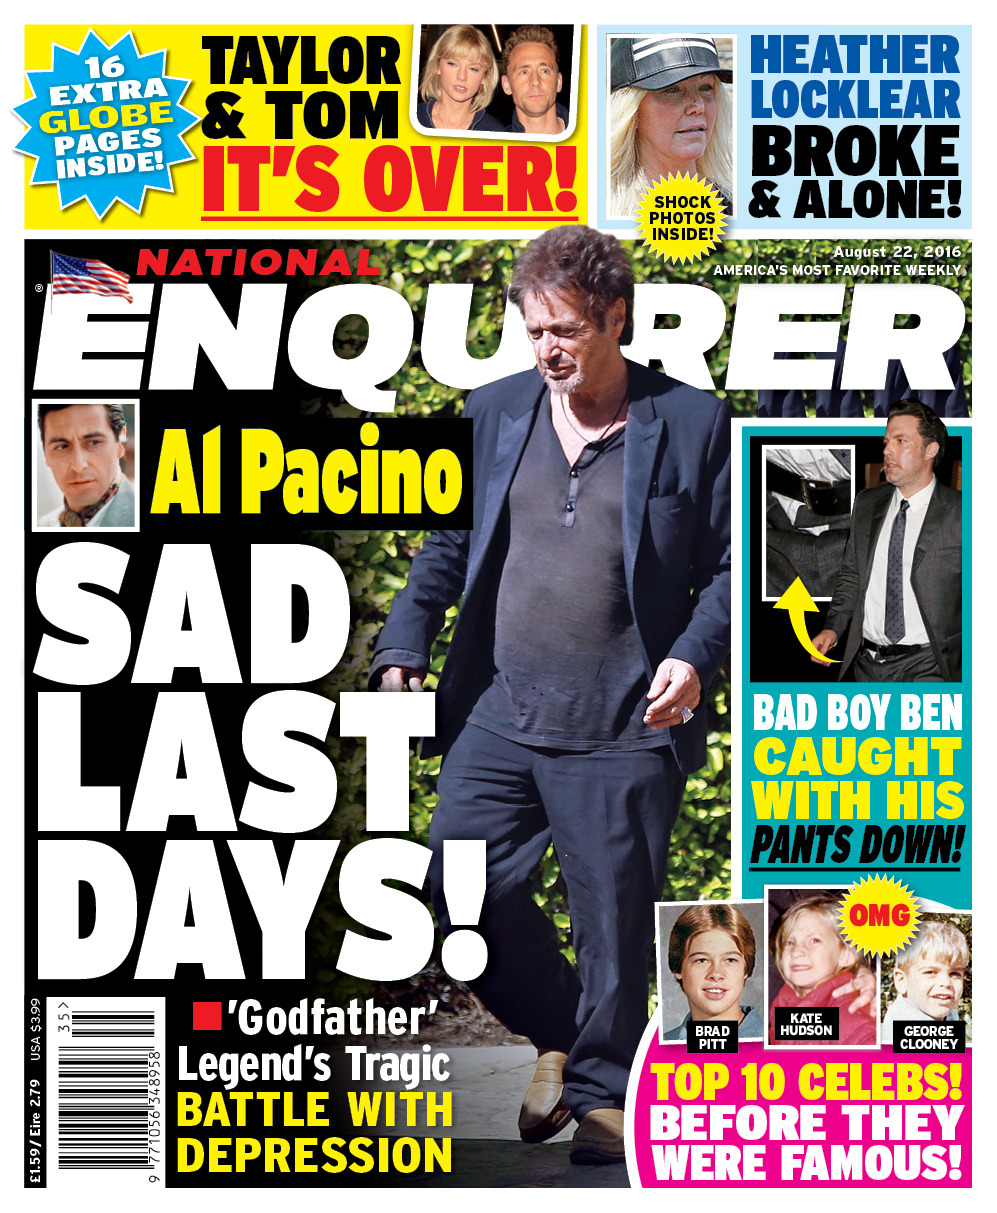 Al Pacino’s Sad Last Days! Read all about the ‘Godfather’ legend’s tragic battle with depression in the latest issue of National Enquirer on sale now, go here to find your nearest stockist